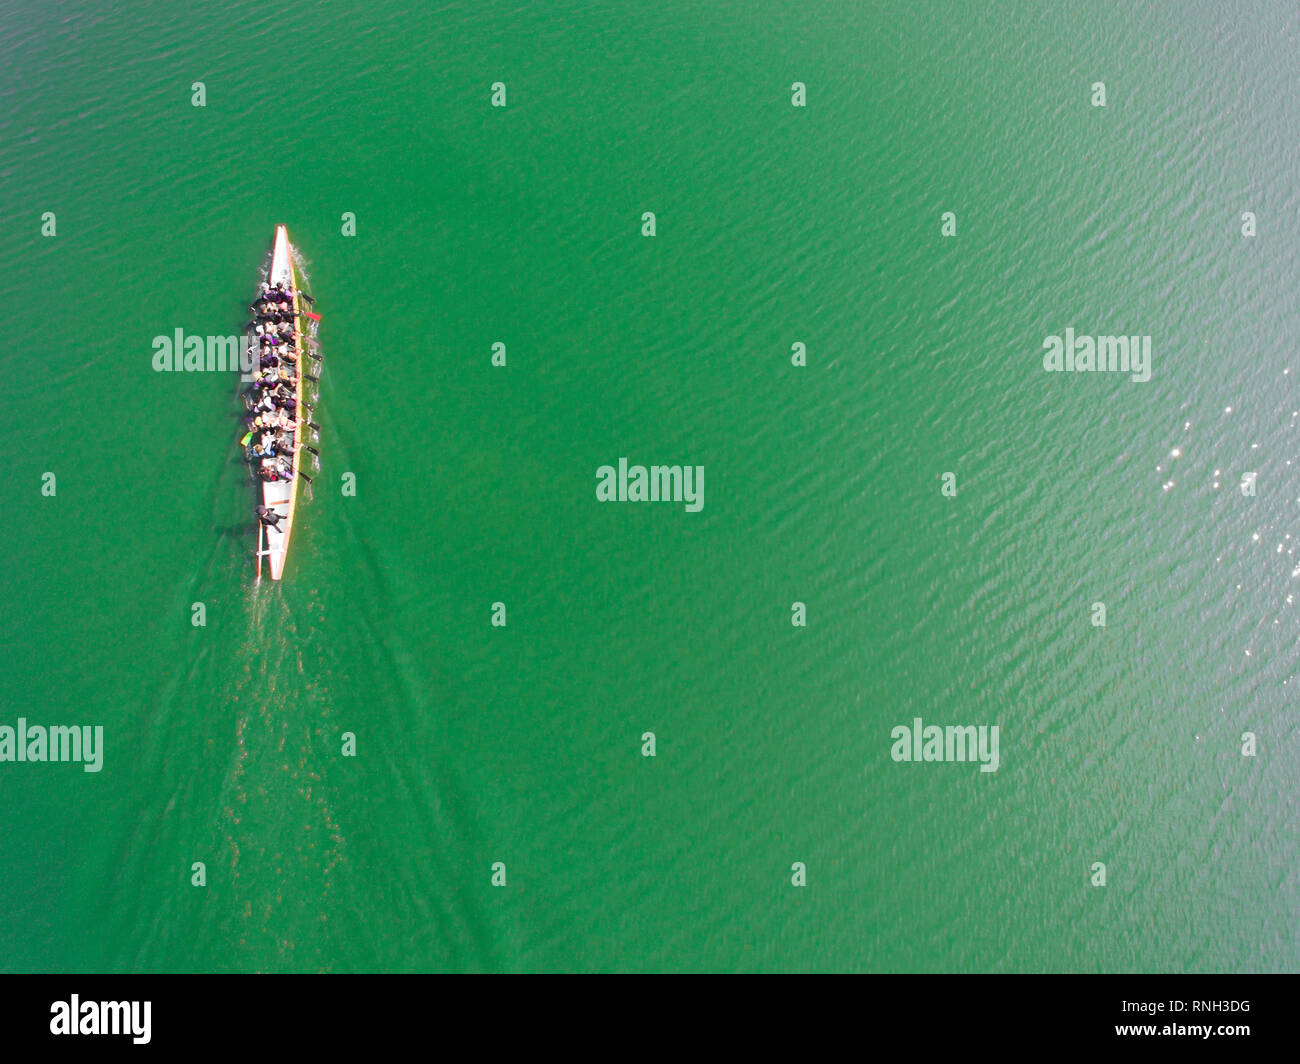 Aerial view of rowing team on water Stock Photo